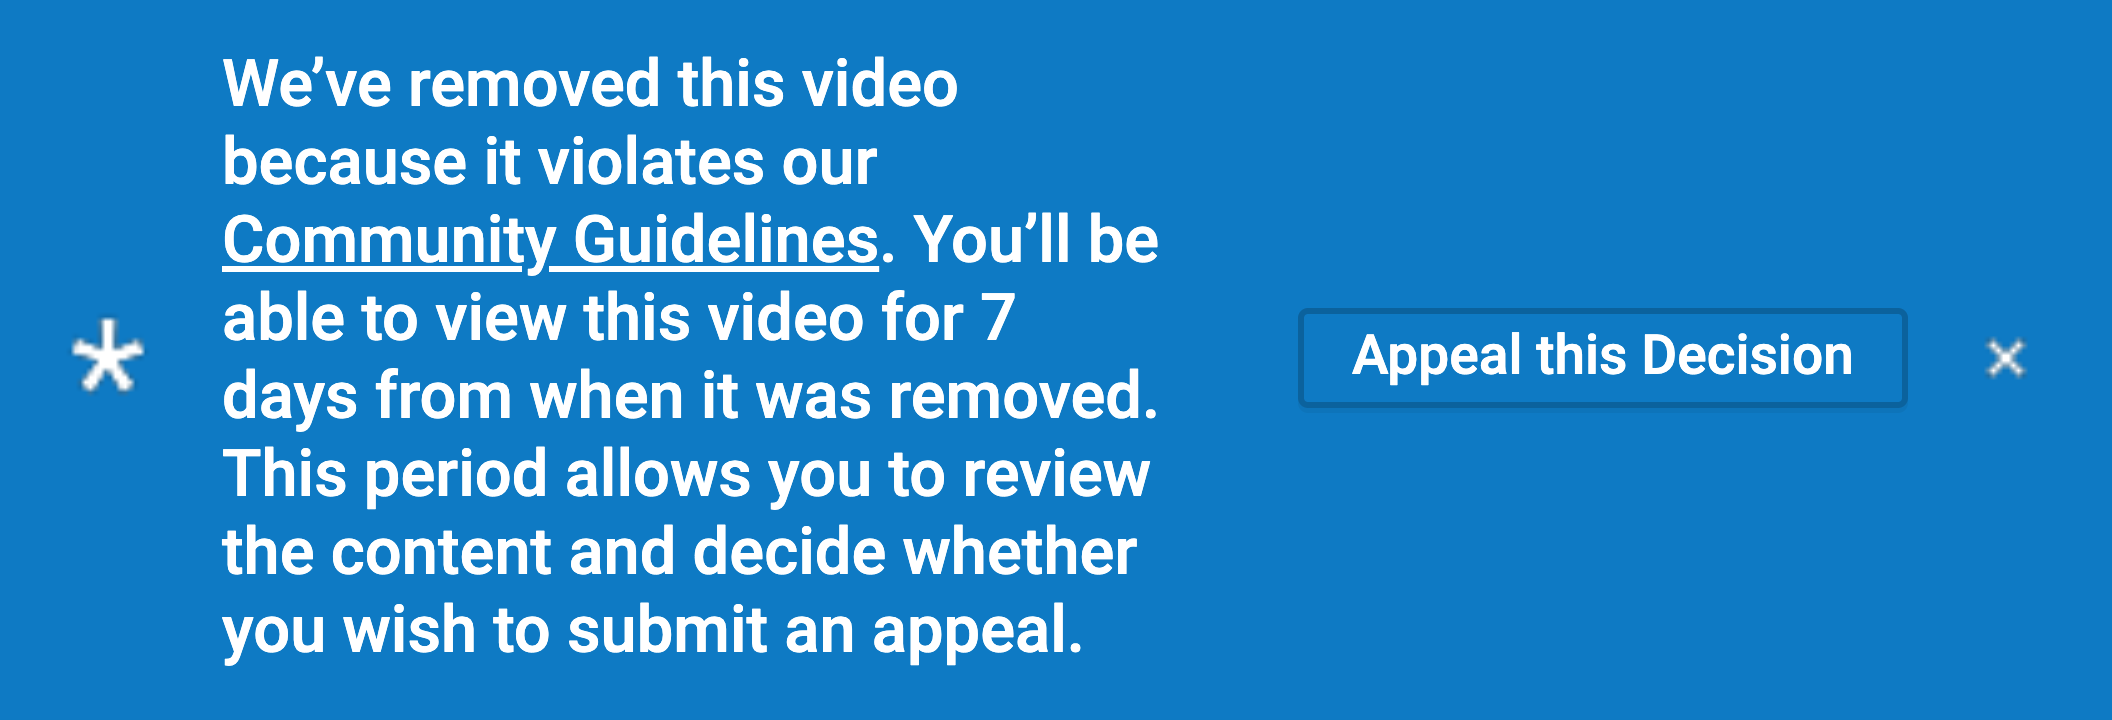 Youtube Video Removed Message